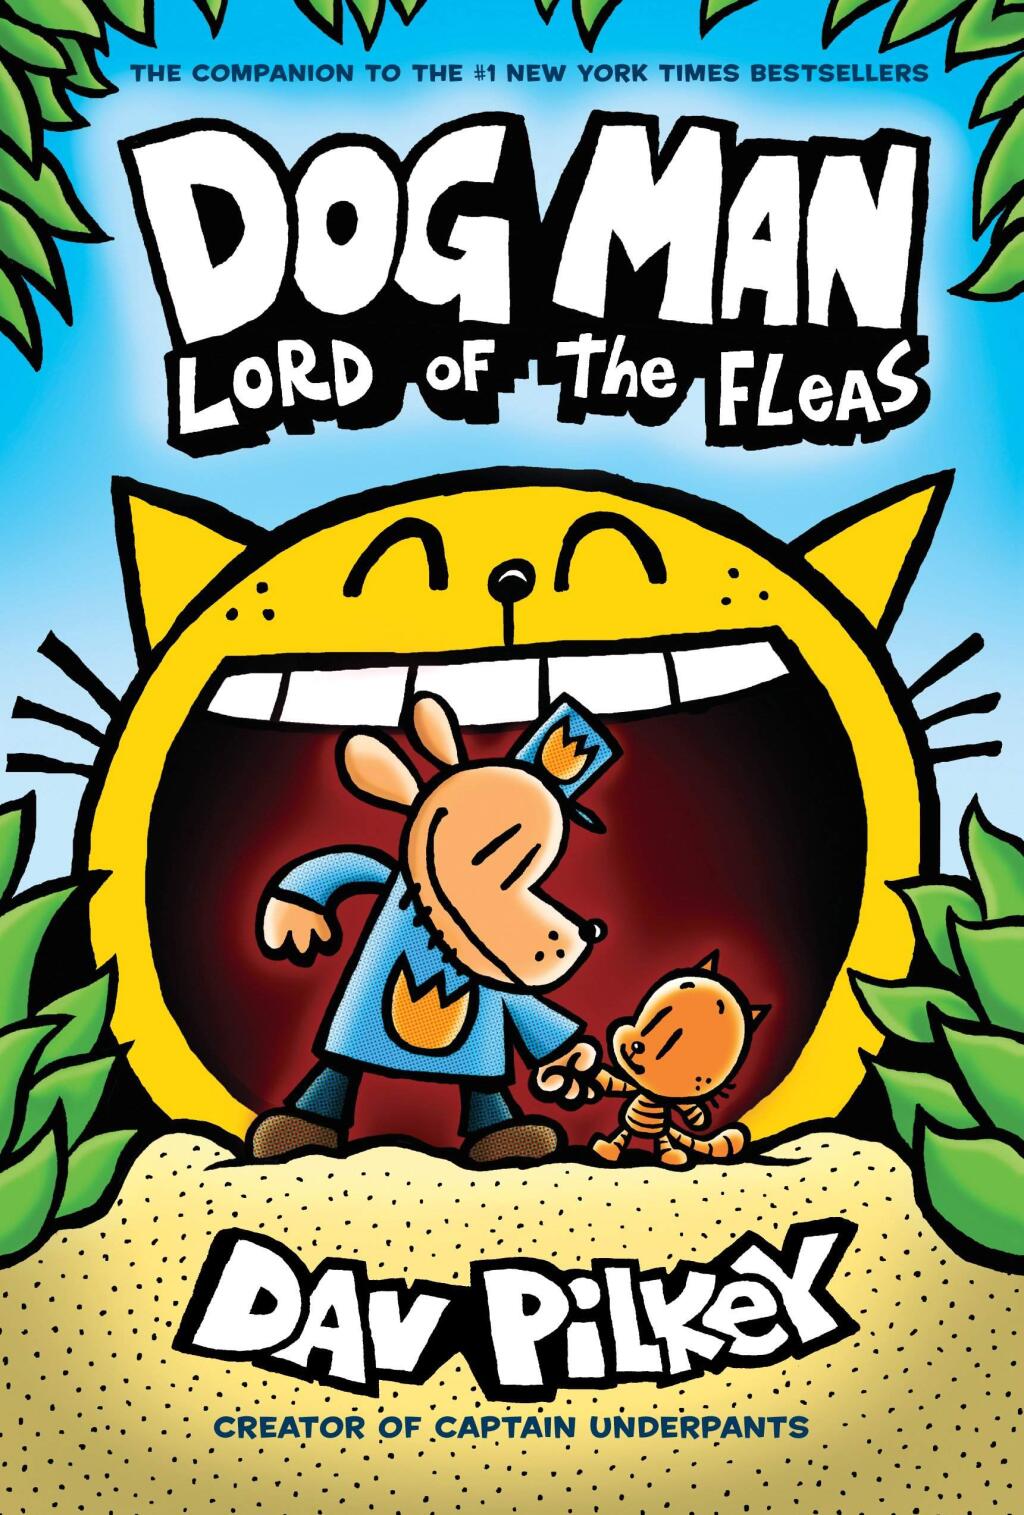 FLEA BAGGED - Dav Pilkey's Dog Man: Lord of the Fleas is the Number One bestselling book on this week's Kids and Young Adults Top 10 List.